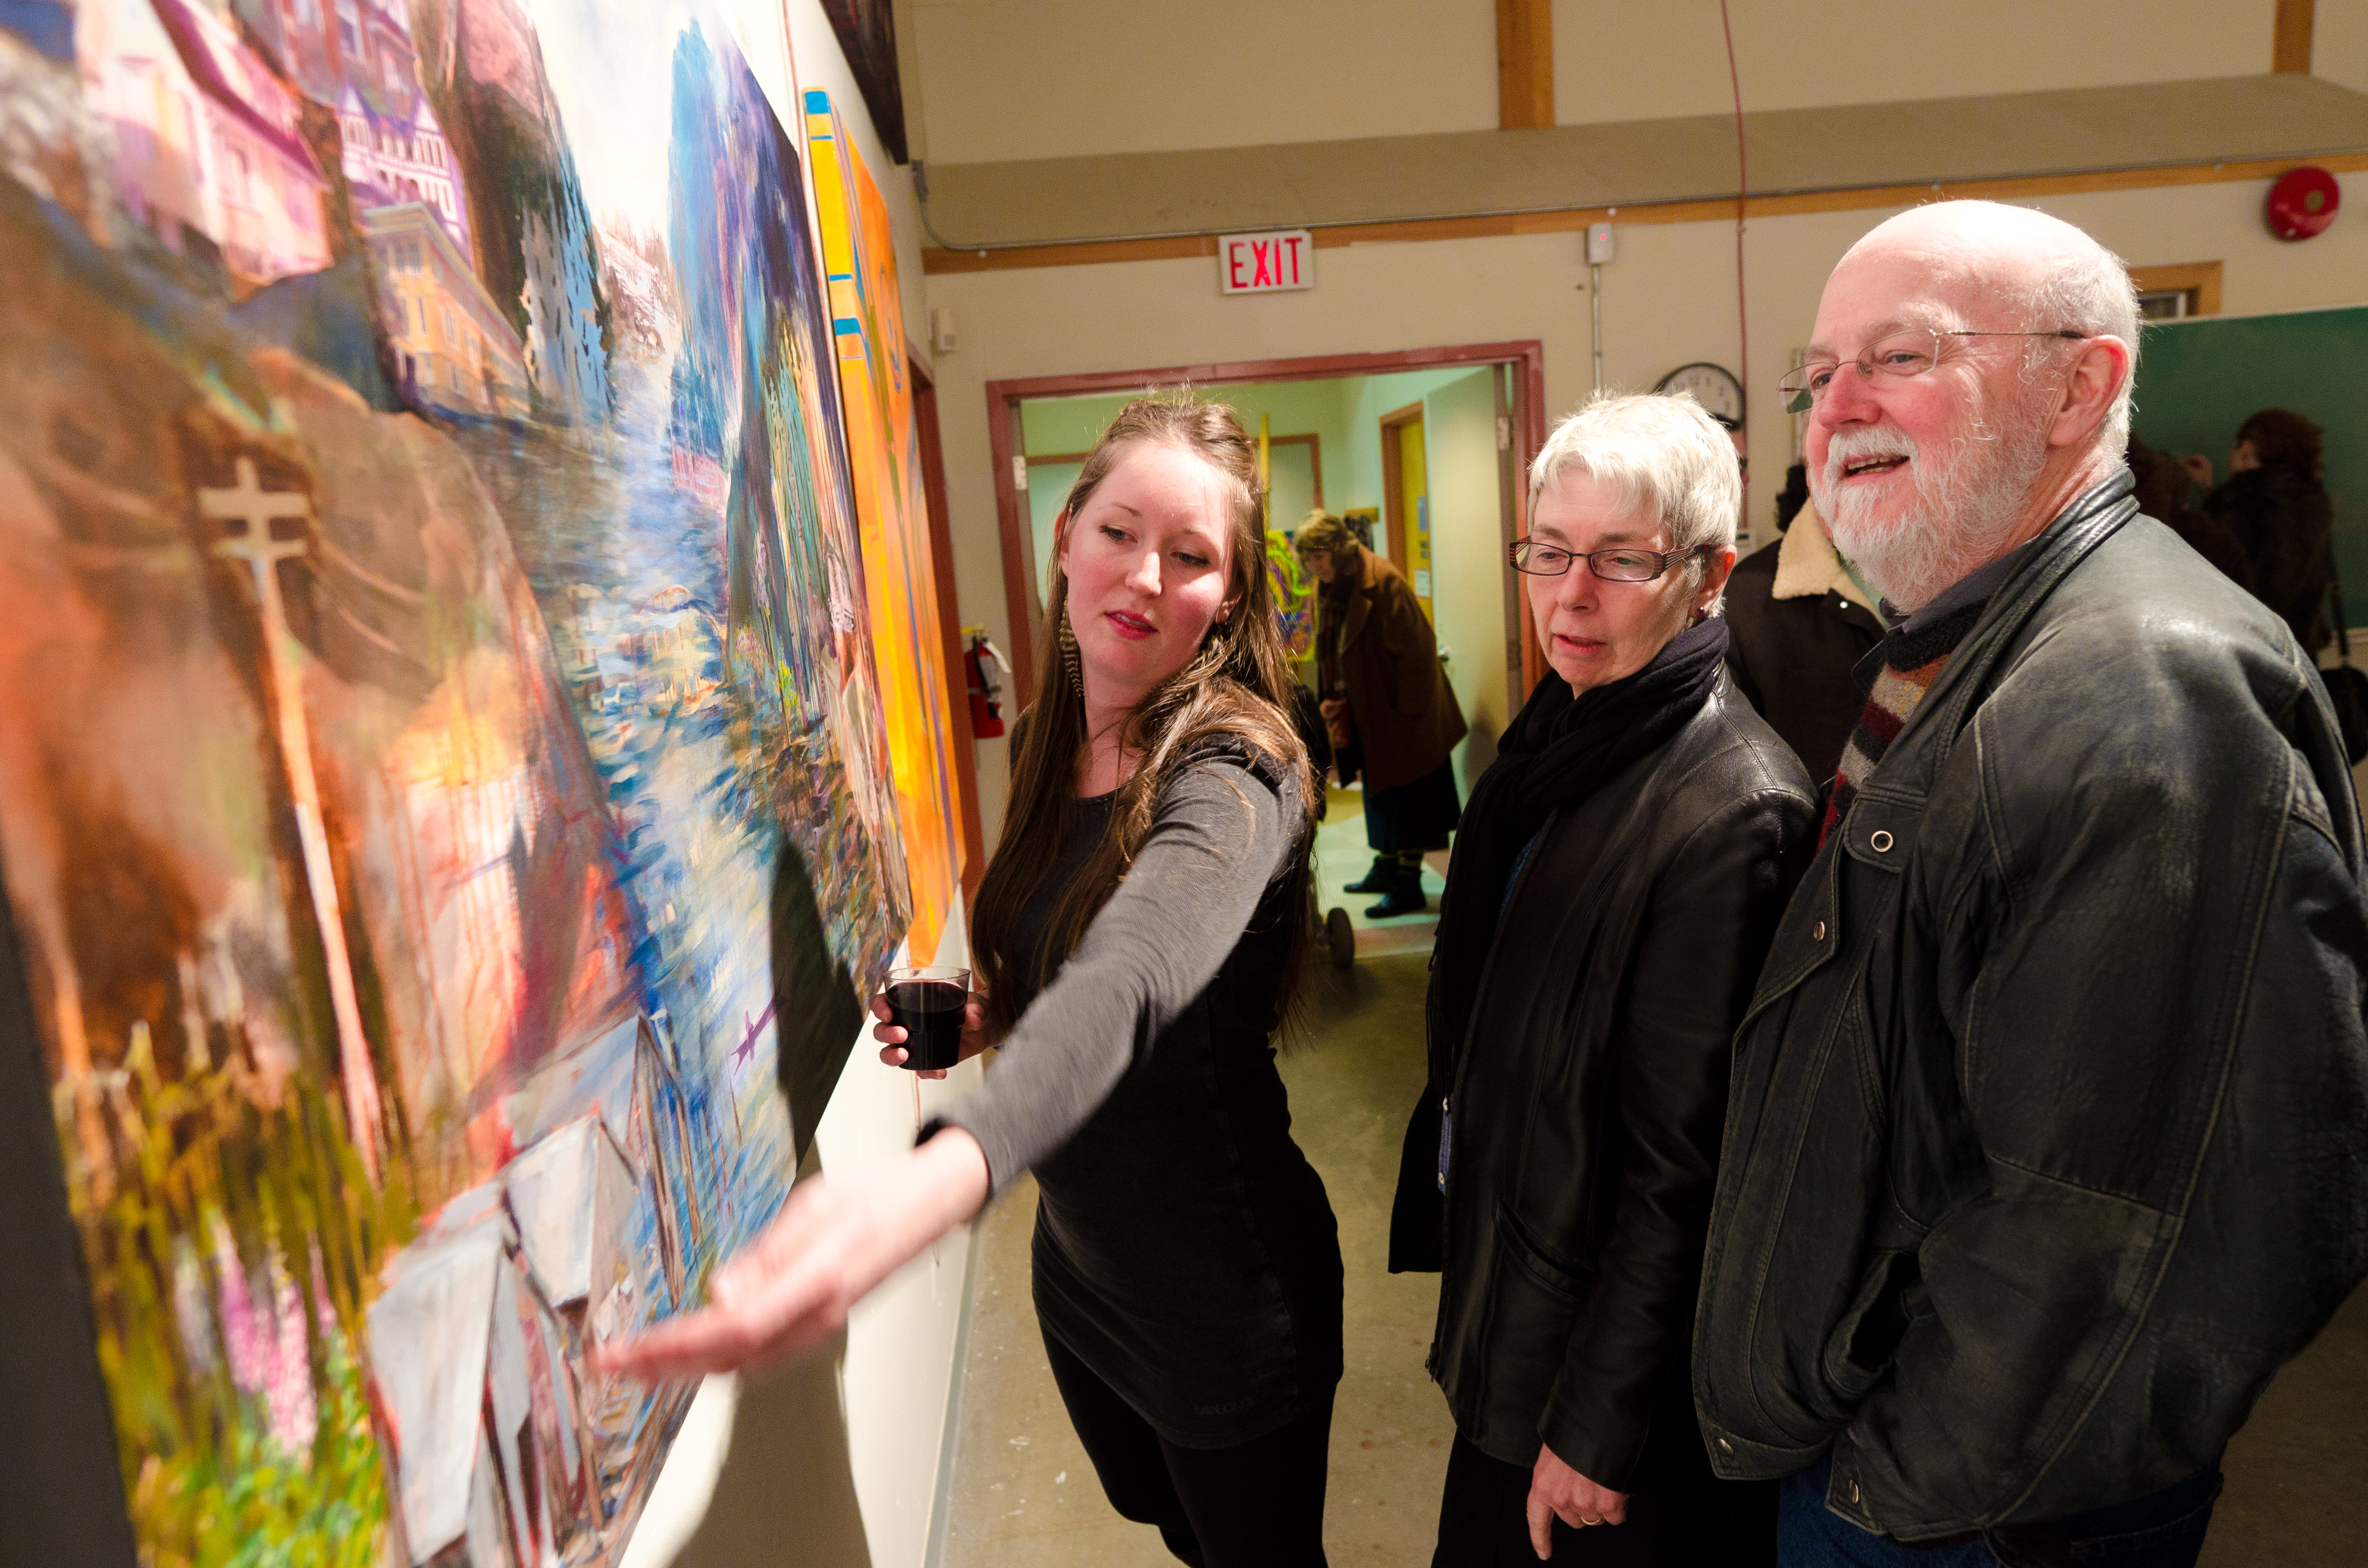 Celebrate Emerging Artists at NIC’s Art Event